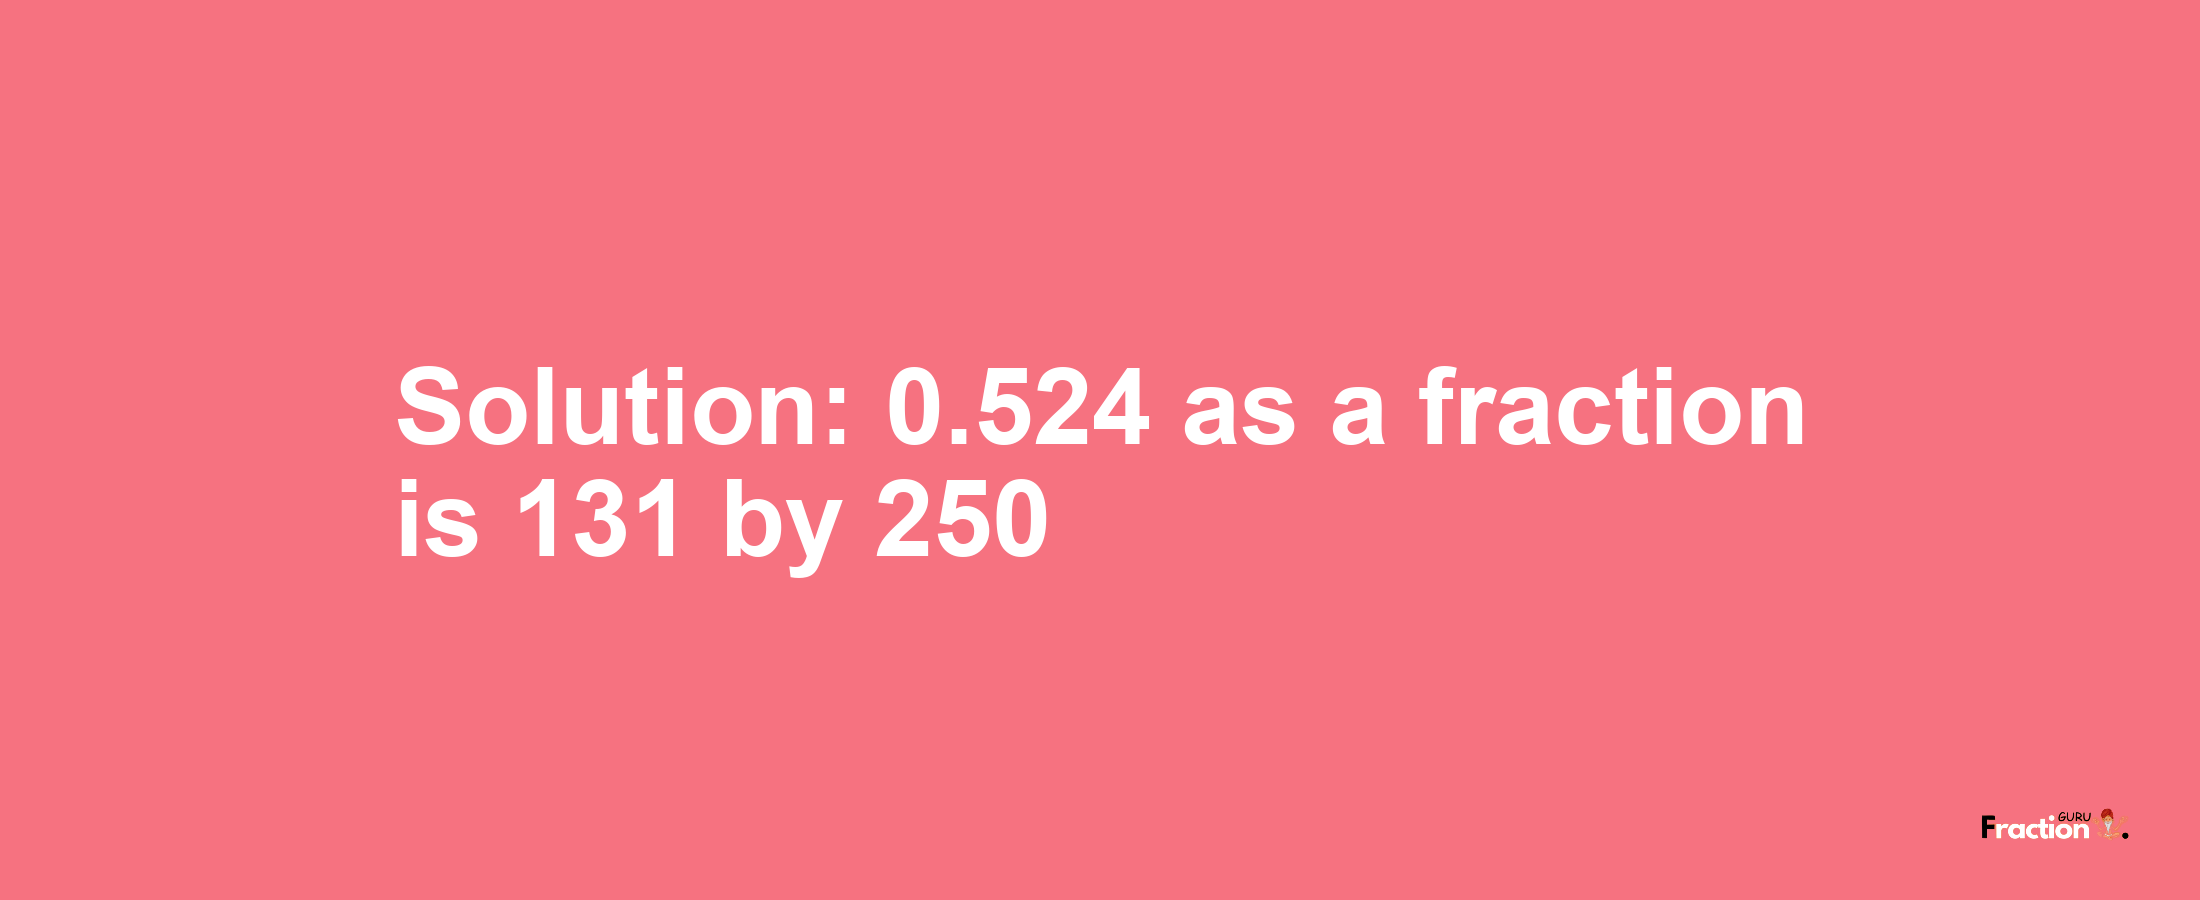 Solution:0.524 as a fraction is 131/250